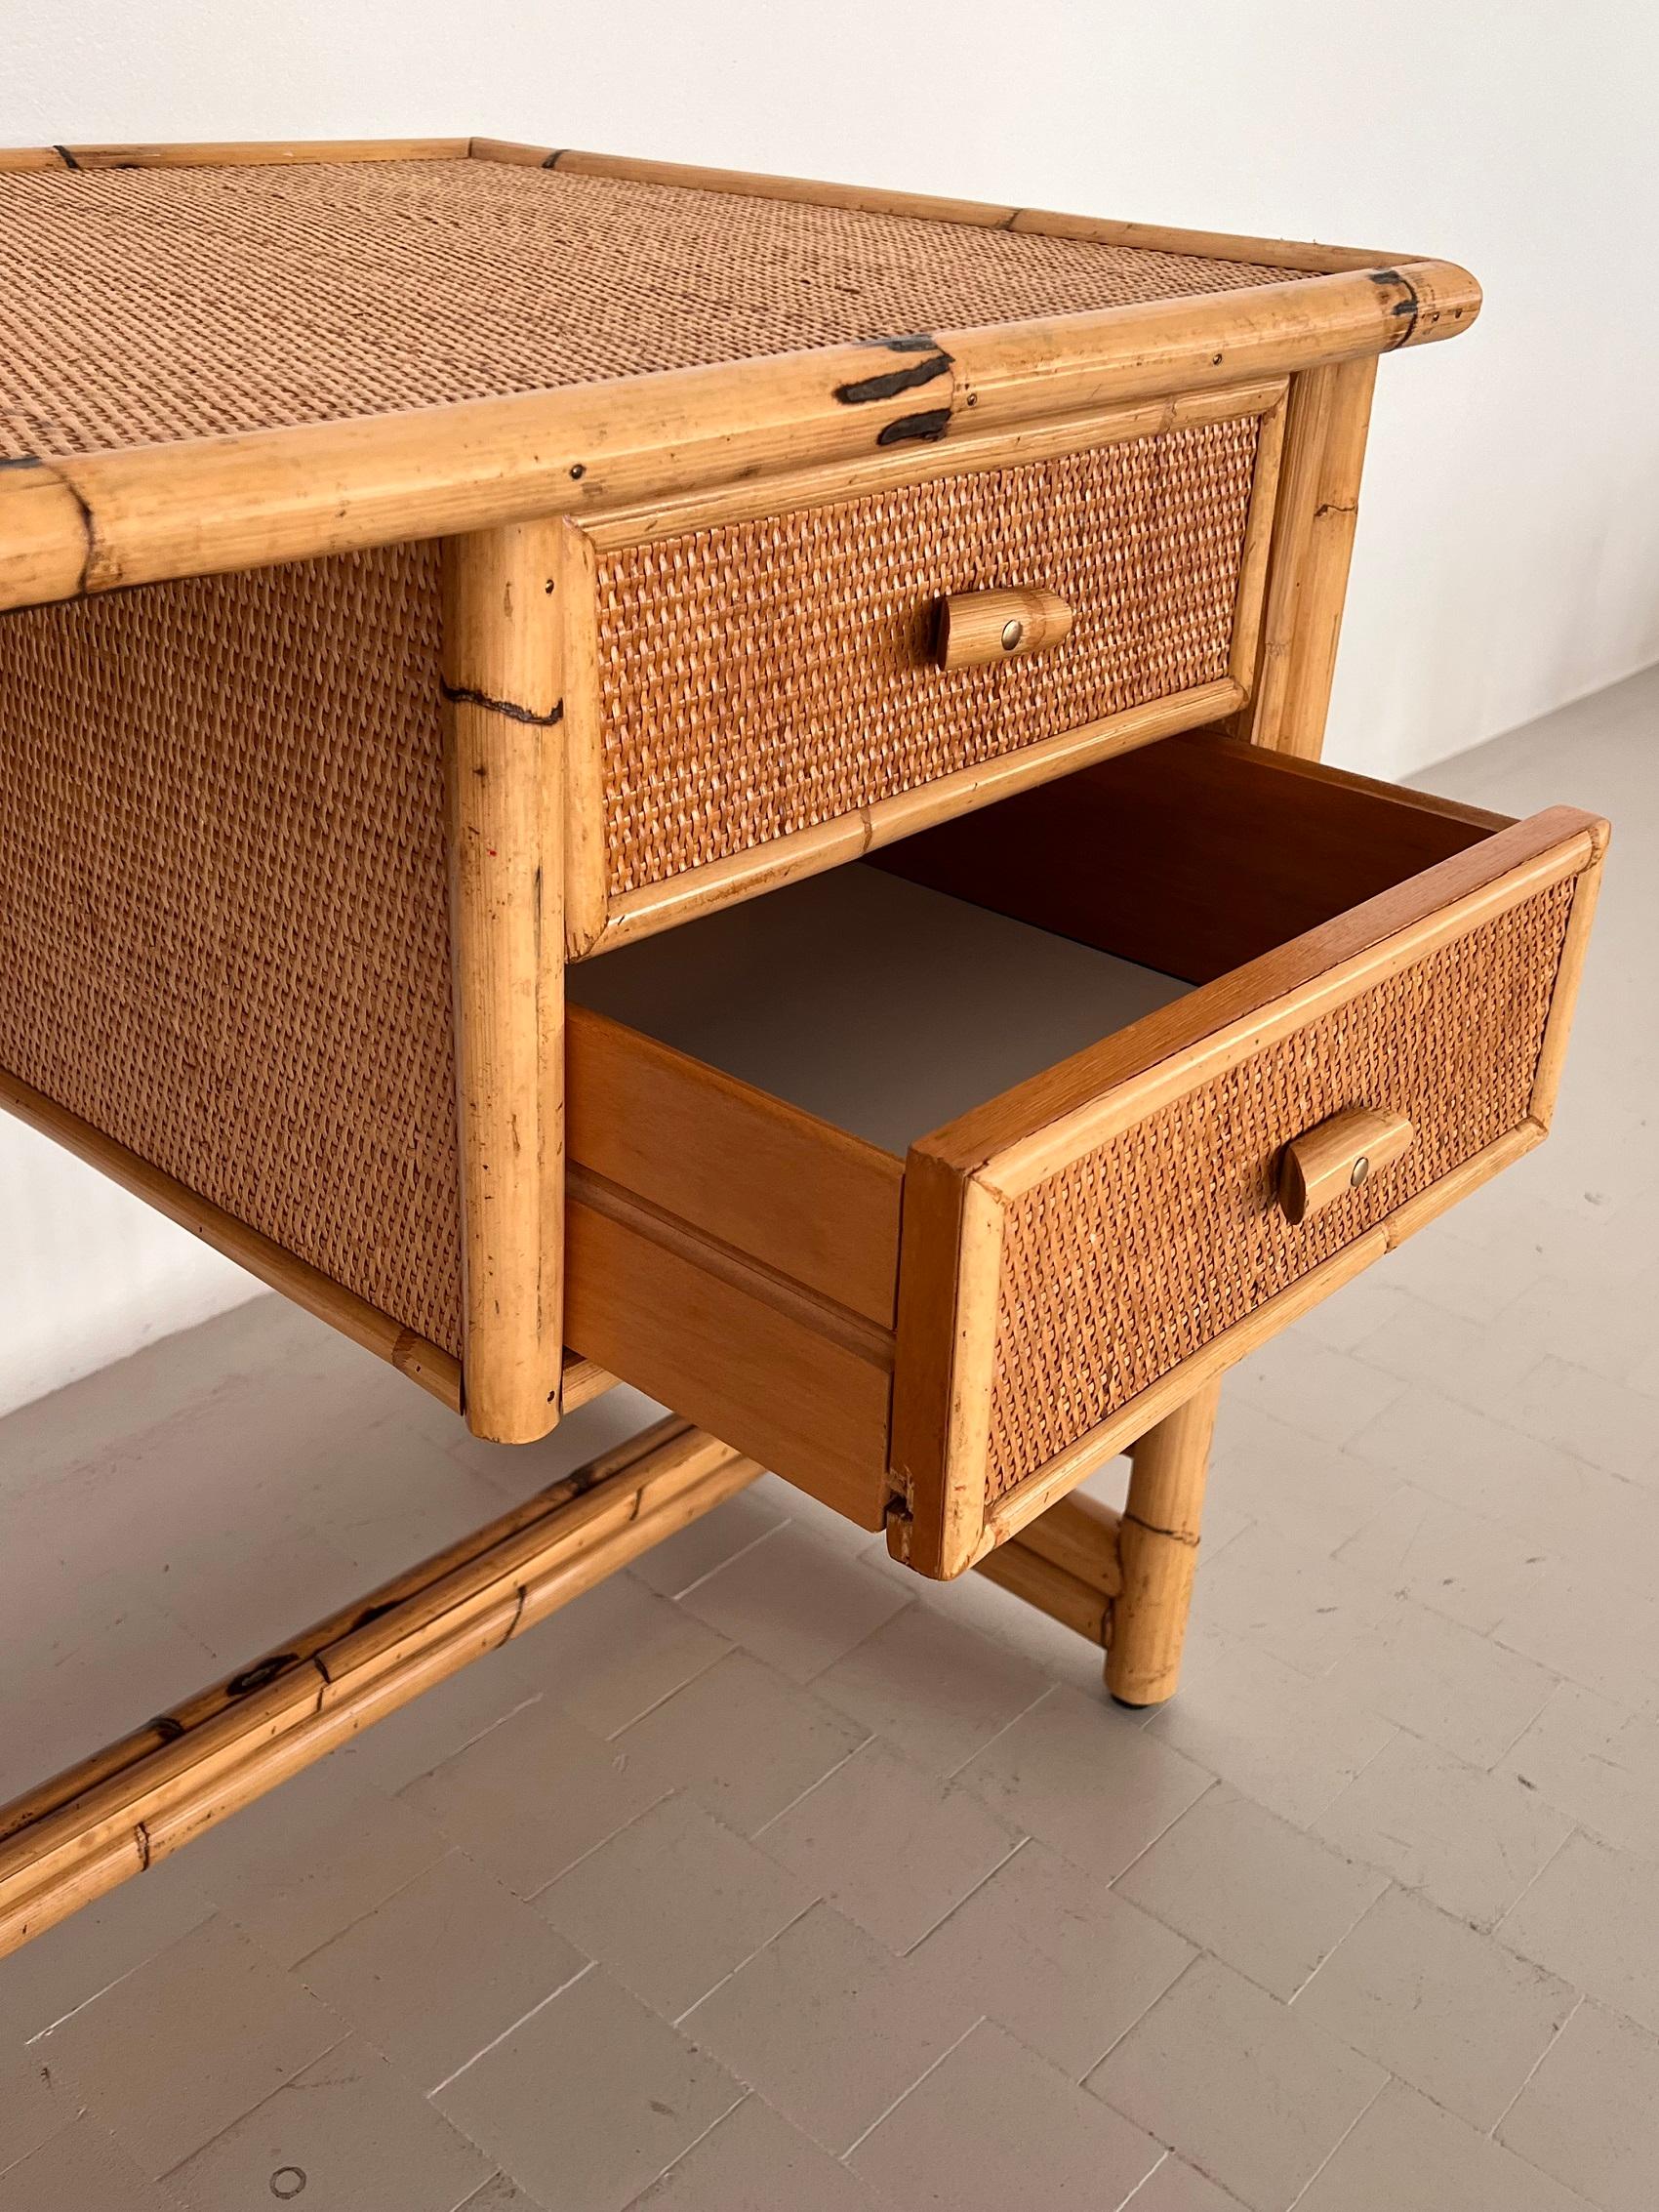 Italian Midcentury Bamboo and Rattan Desk or Vanity with two Drawers, 1970s For Sale 4